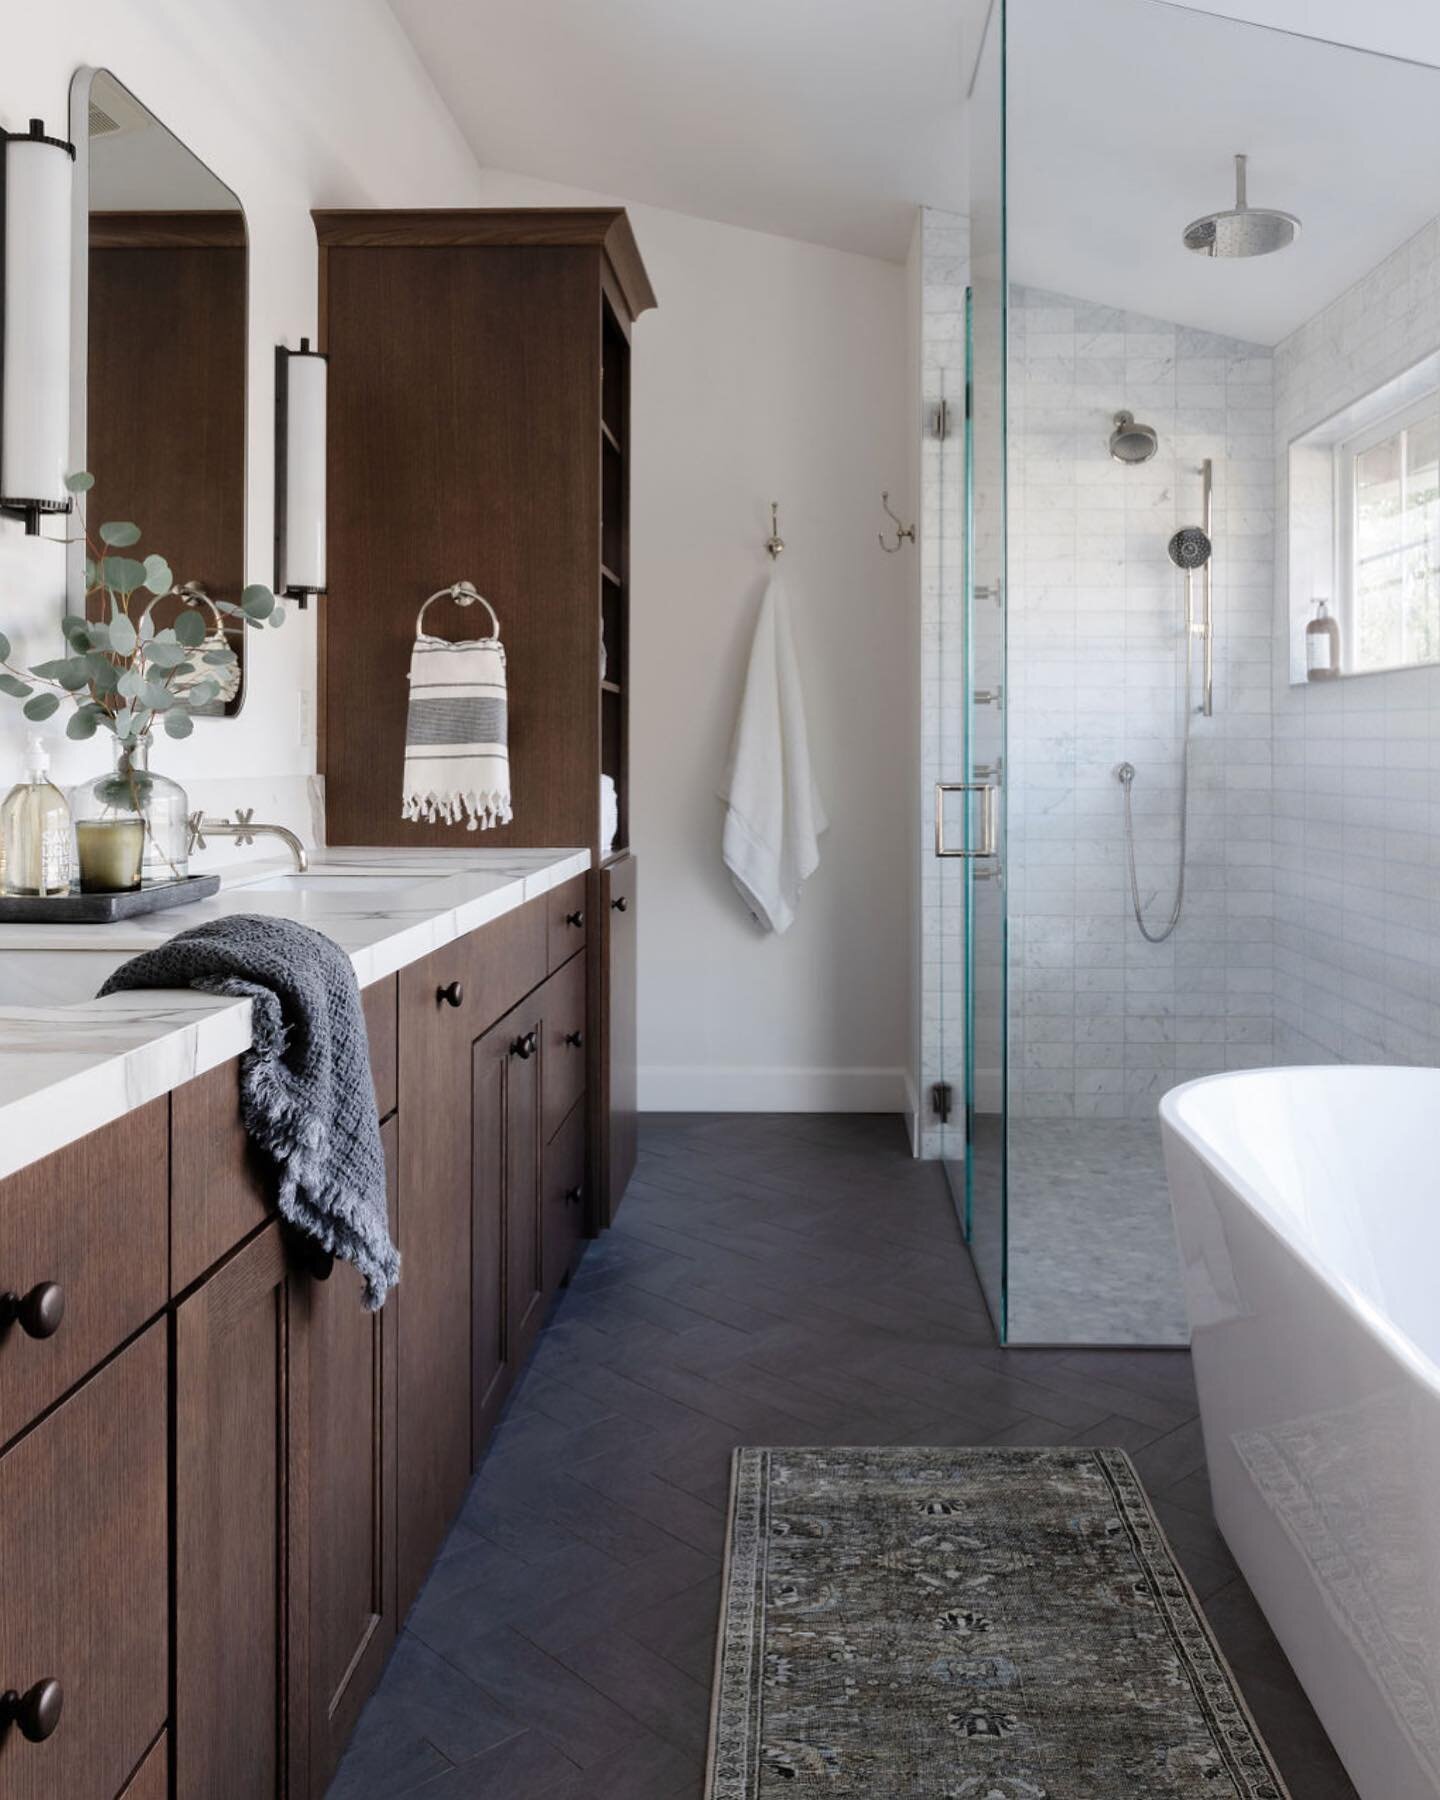 A view looking in - swipe to see this master bath transform over time! Click on the link in my bio for the full blog post of this remodel 📷: @emilykennedyphoto